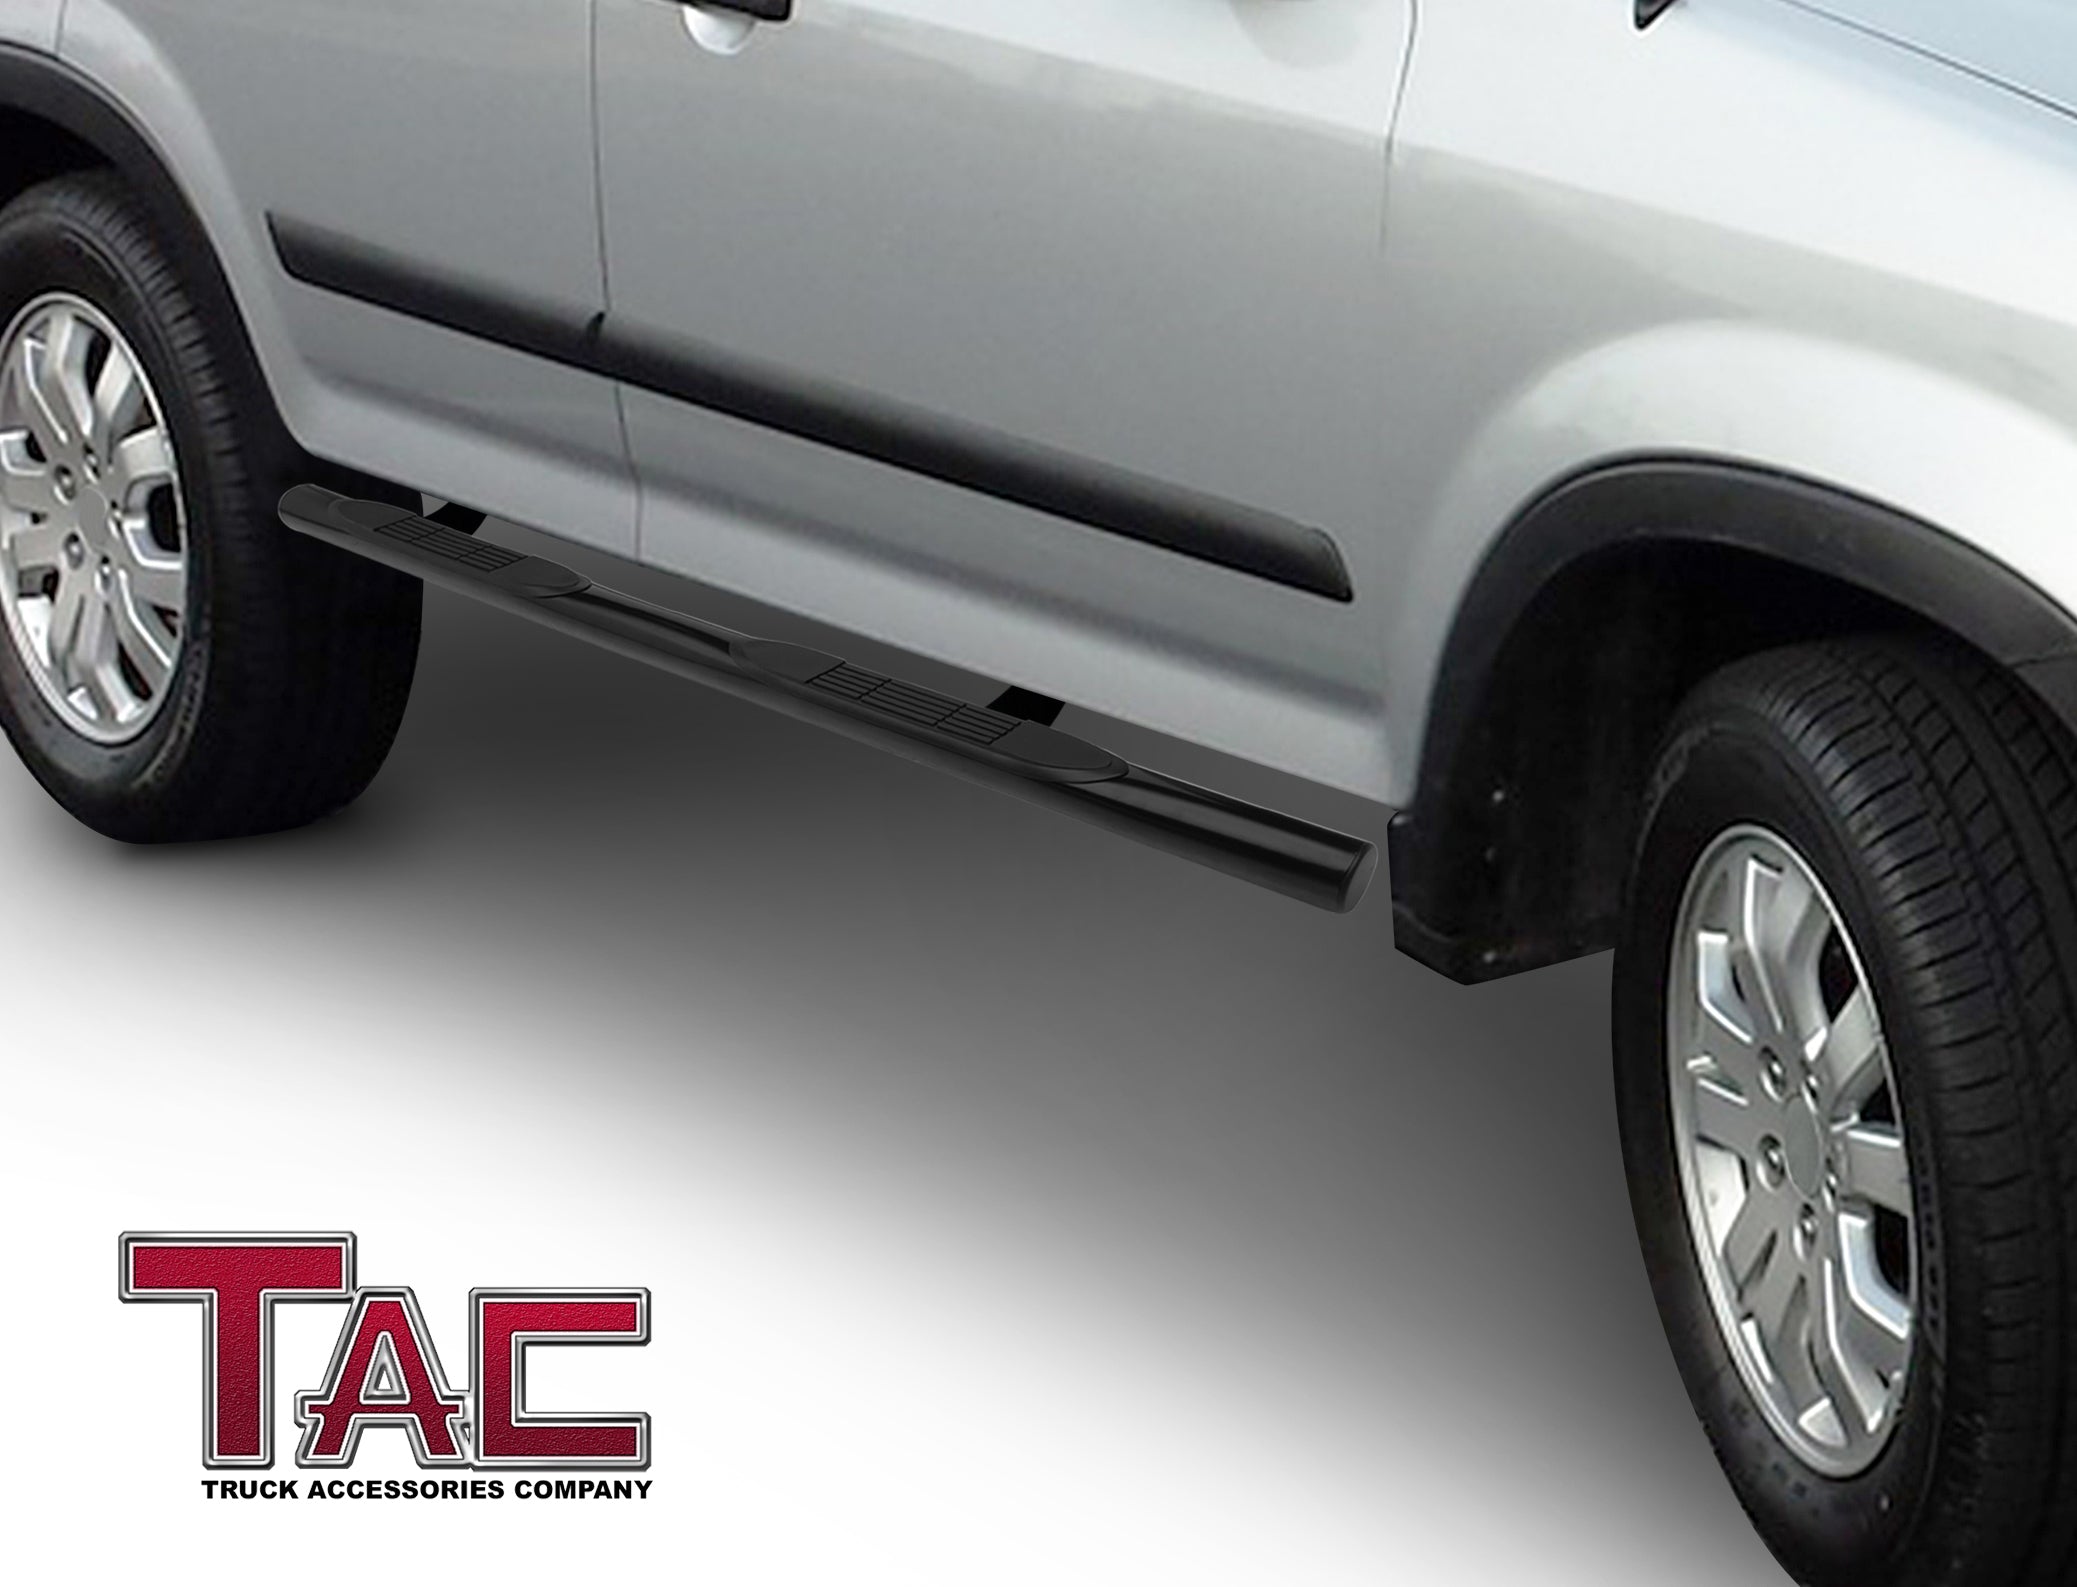 TAC Side Steps fit 2003-2011 Honda Element (Exclude SC model) 3" Black Step Rails Running Boards Off Road Exterior Accessories (2 Pieces Running Boards) - 0